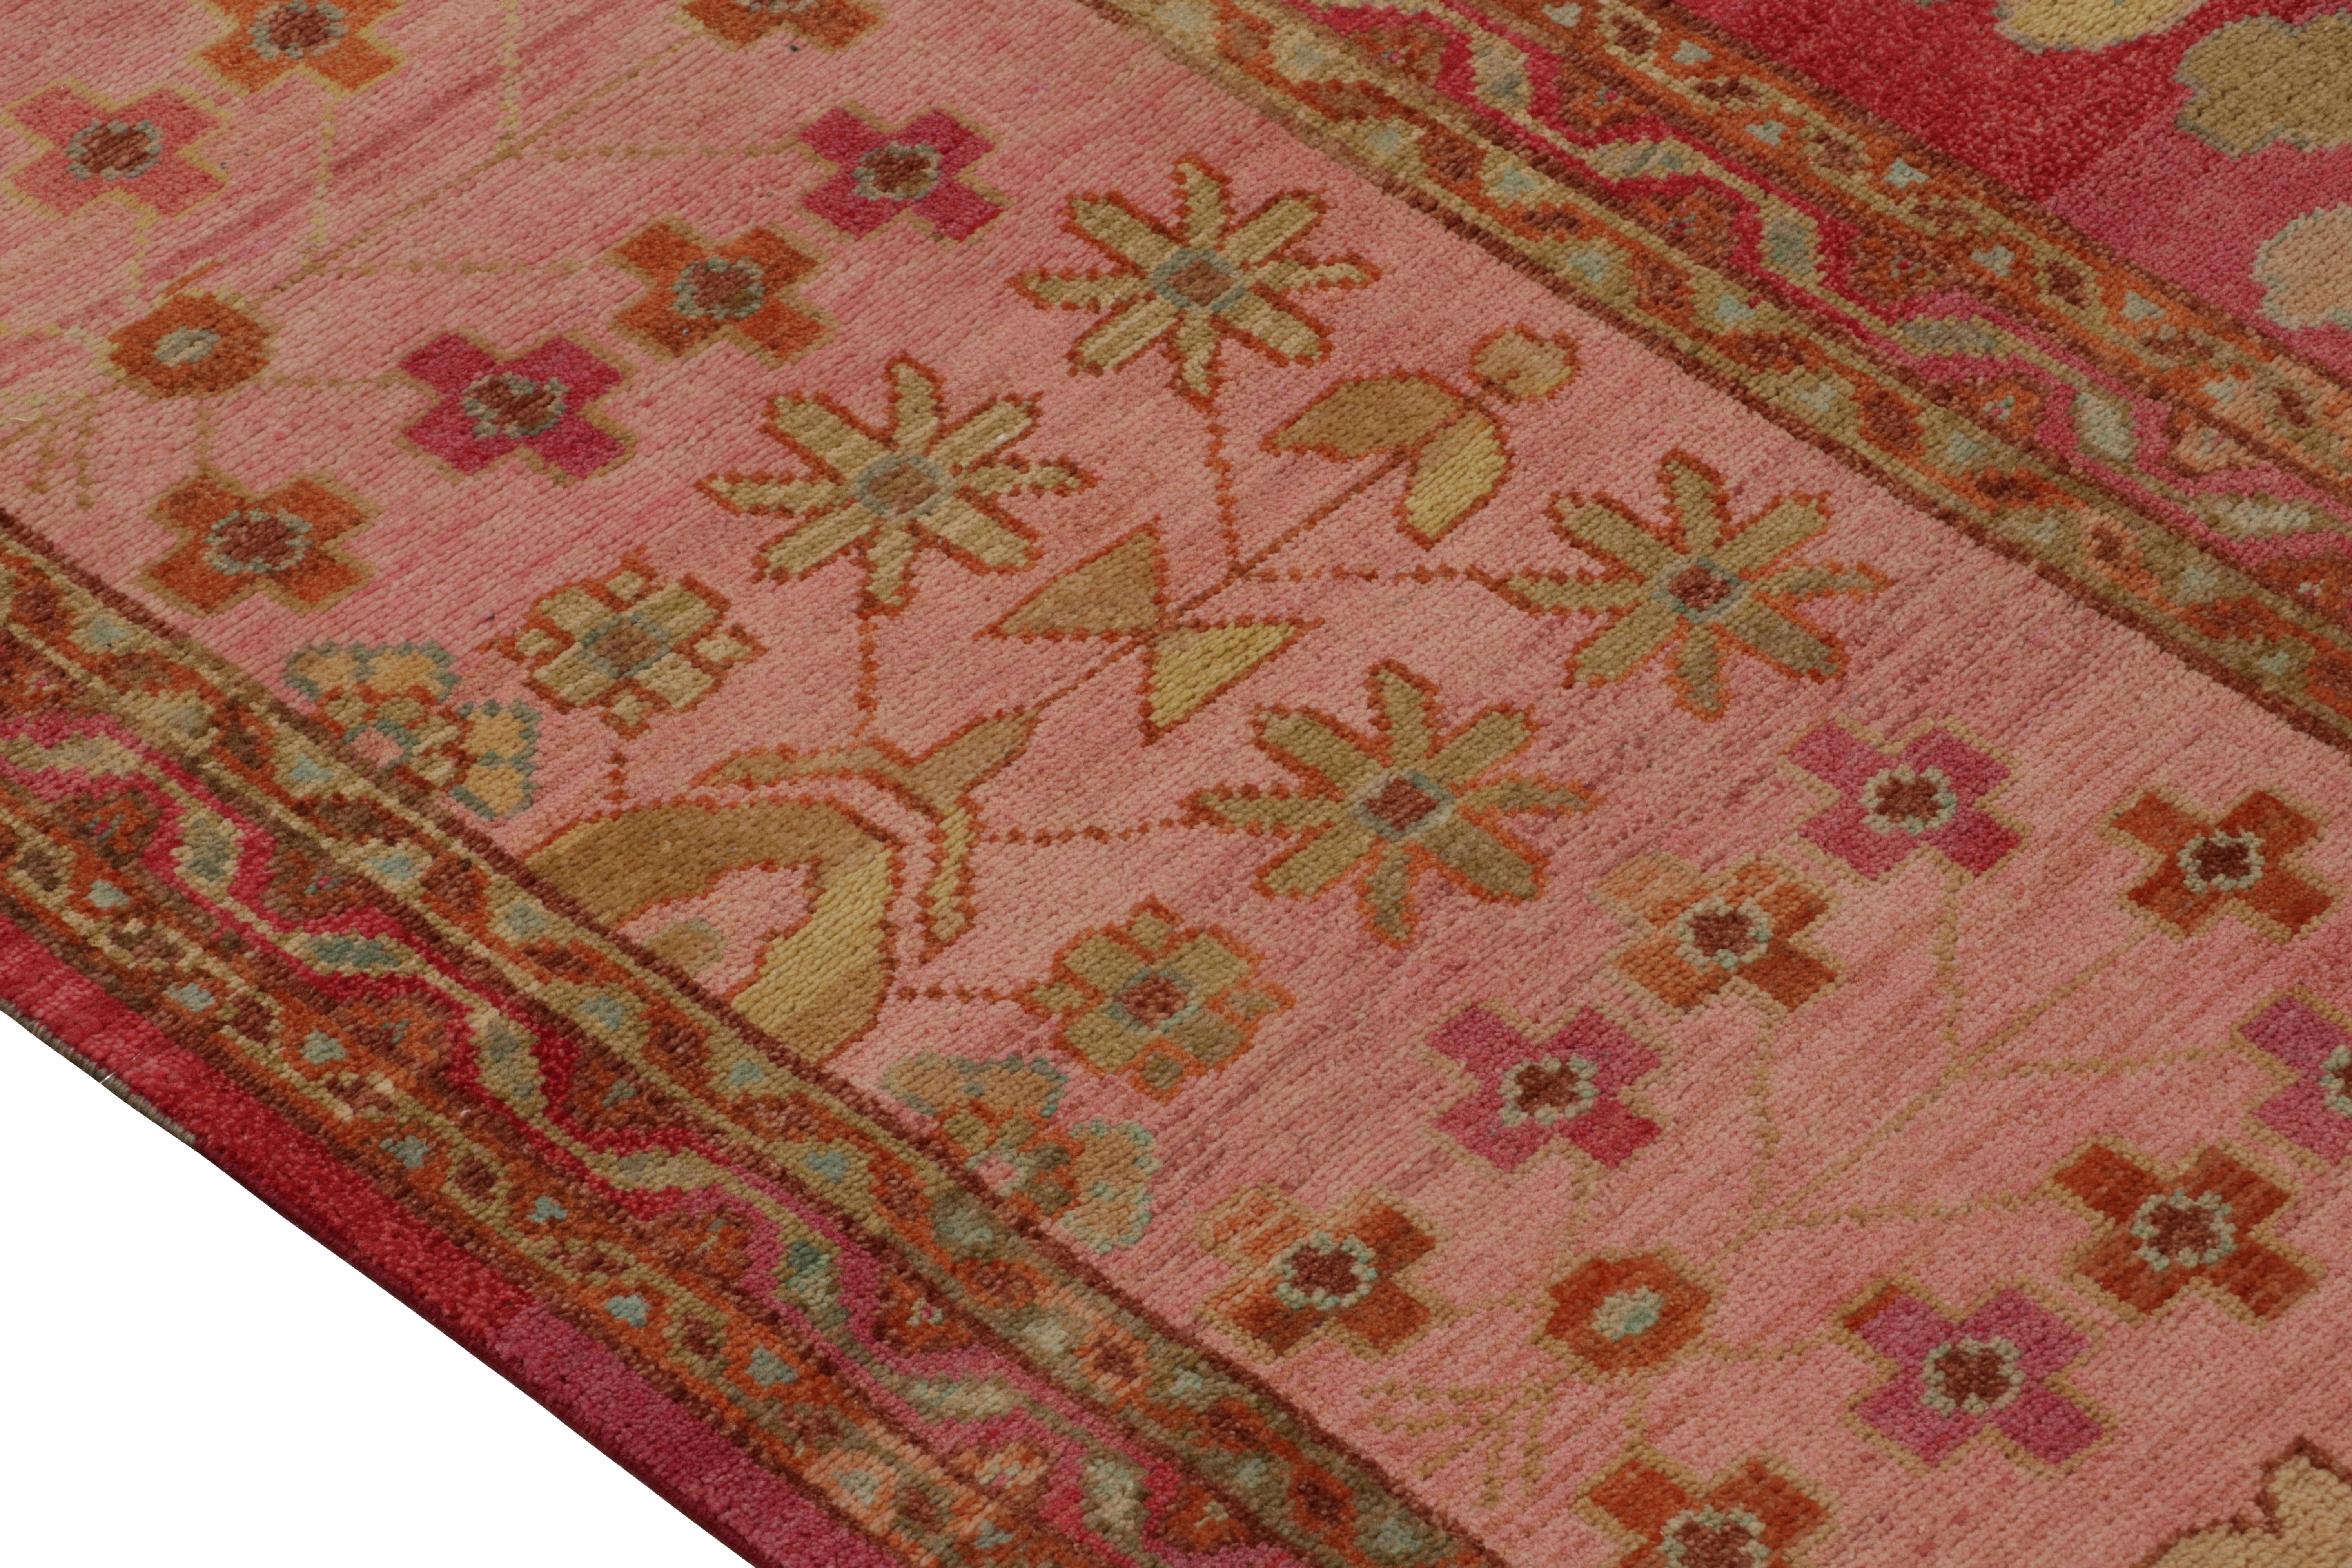 Hand-Woven Rug & Kilim’s Classic Style Silk Rug in Pink, Beige-Brown Floral Pattern For Sale